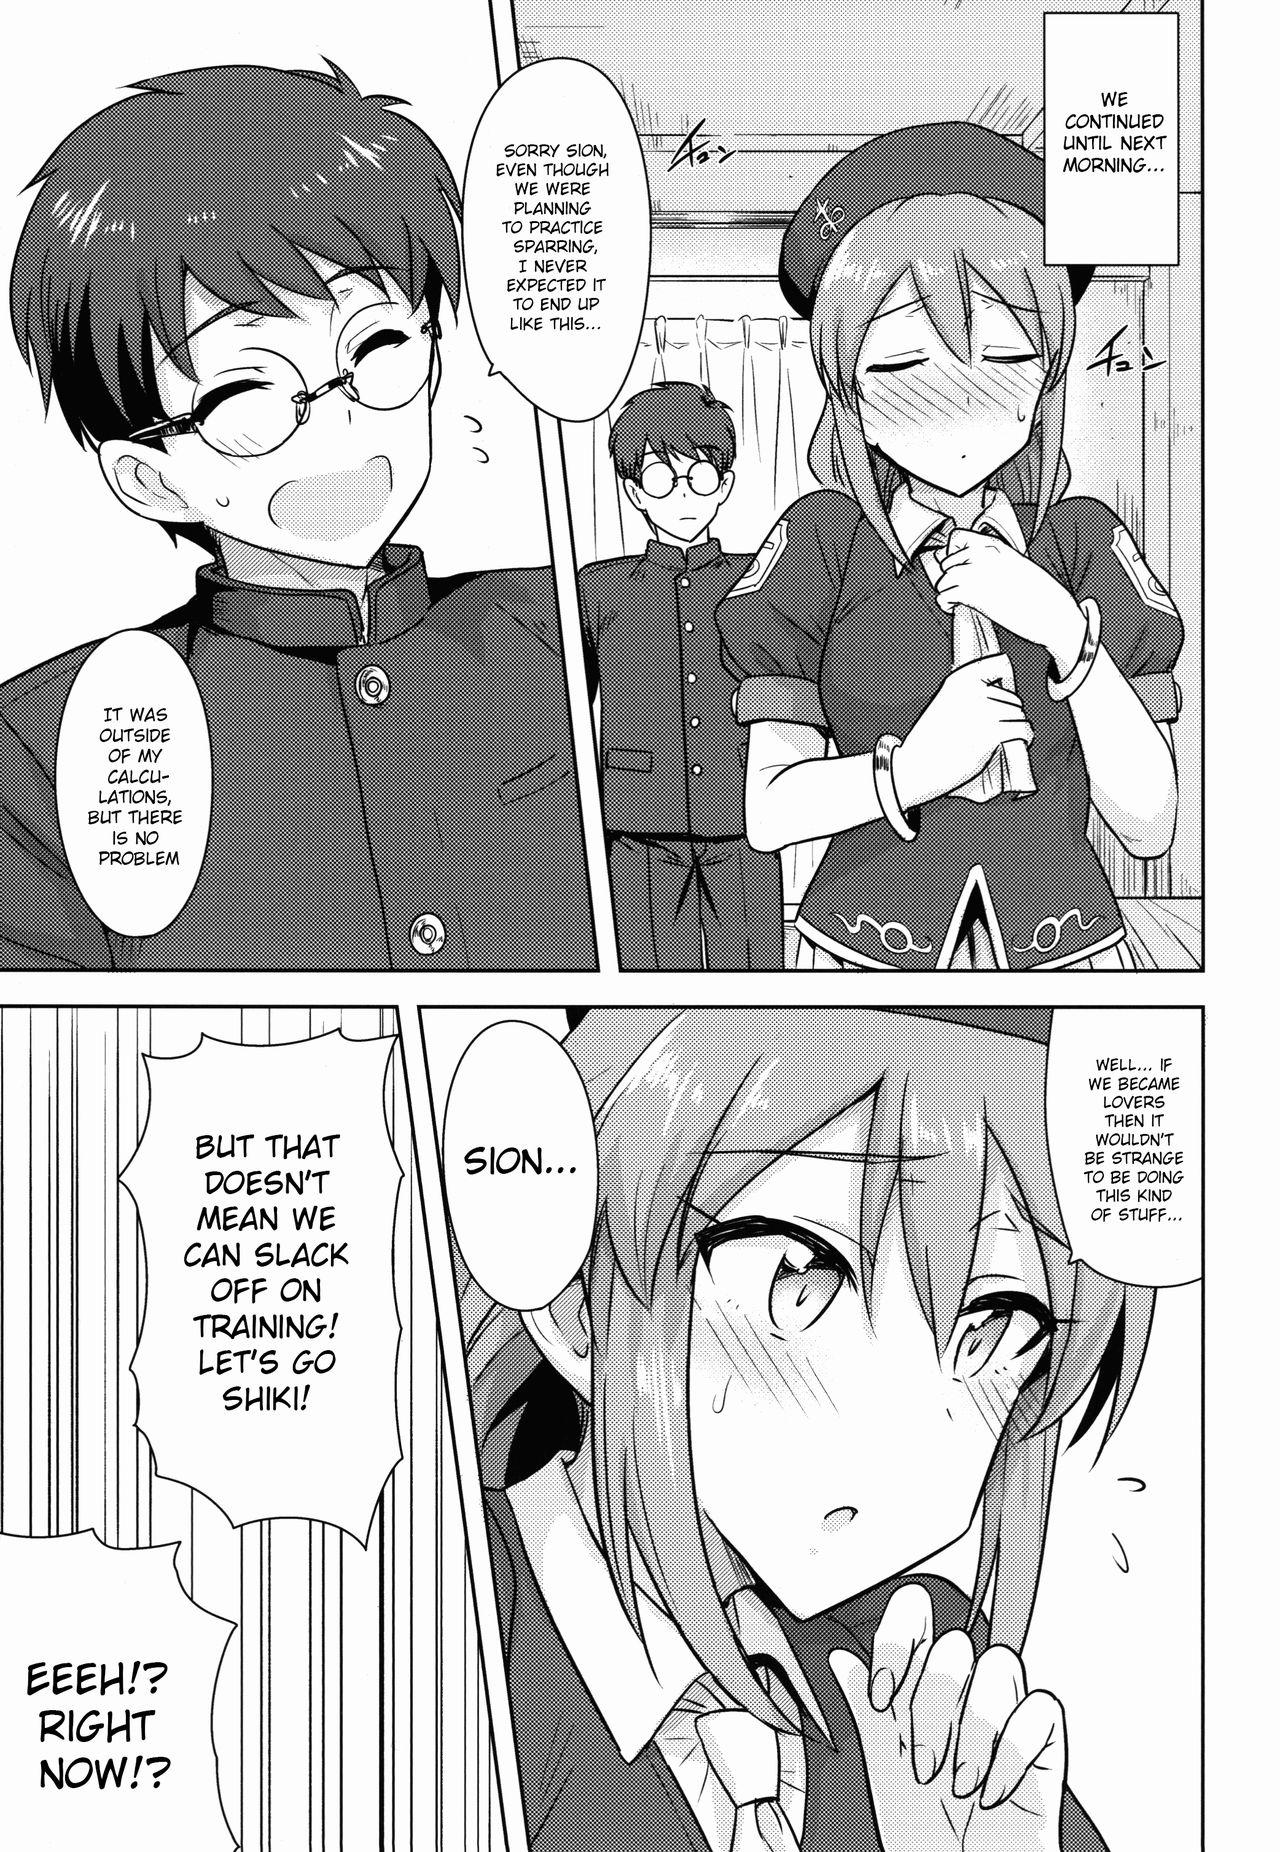 Dando Aru Hi no Futari MelBlo Hen | A Certain Day with Each Other Melty Blood Hen - Tsukihime Wet Pussy - Page 8